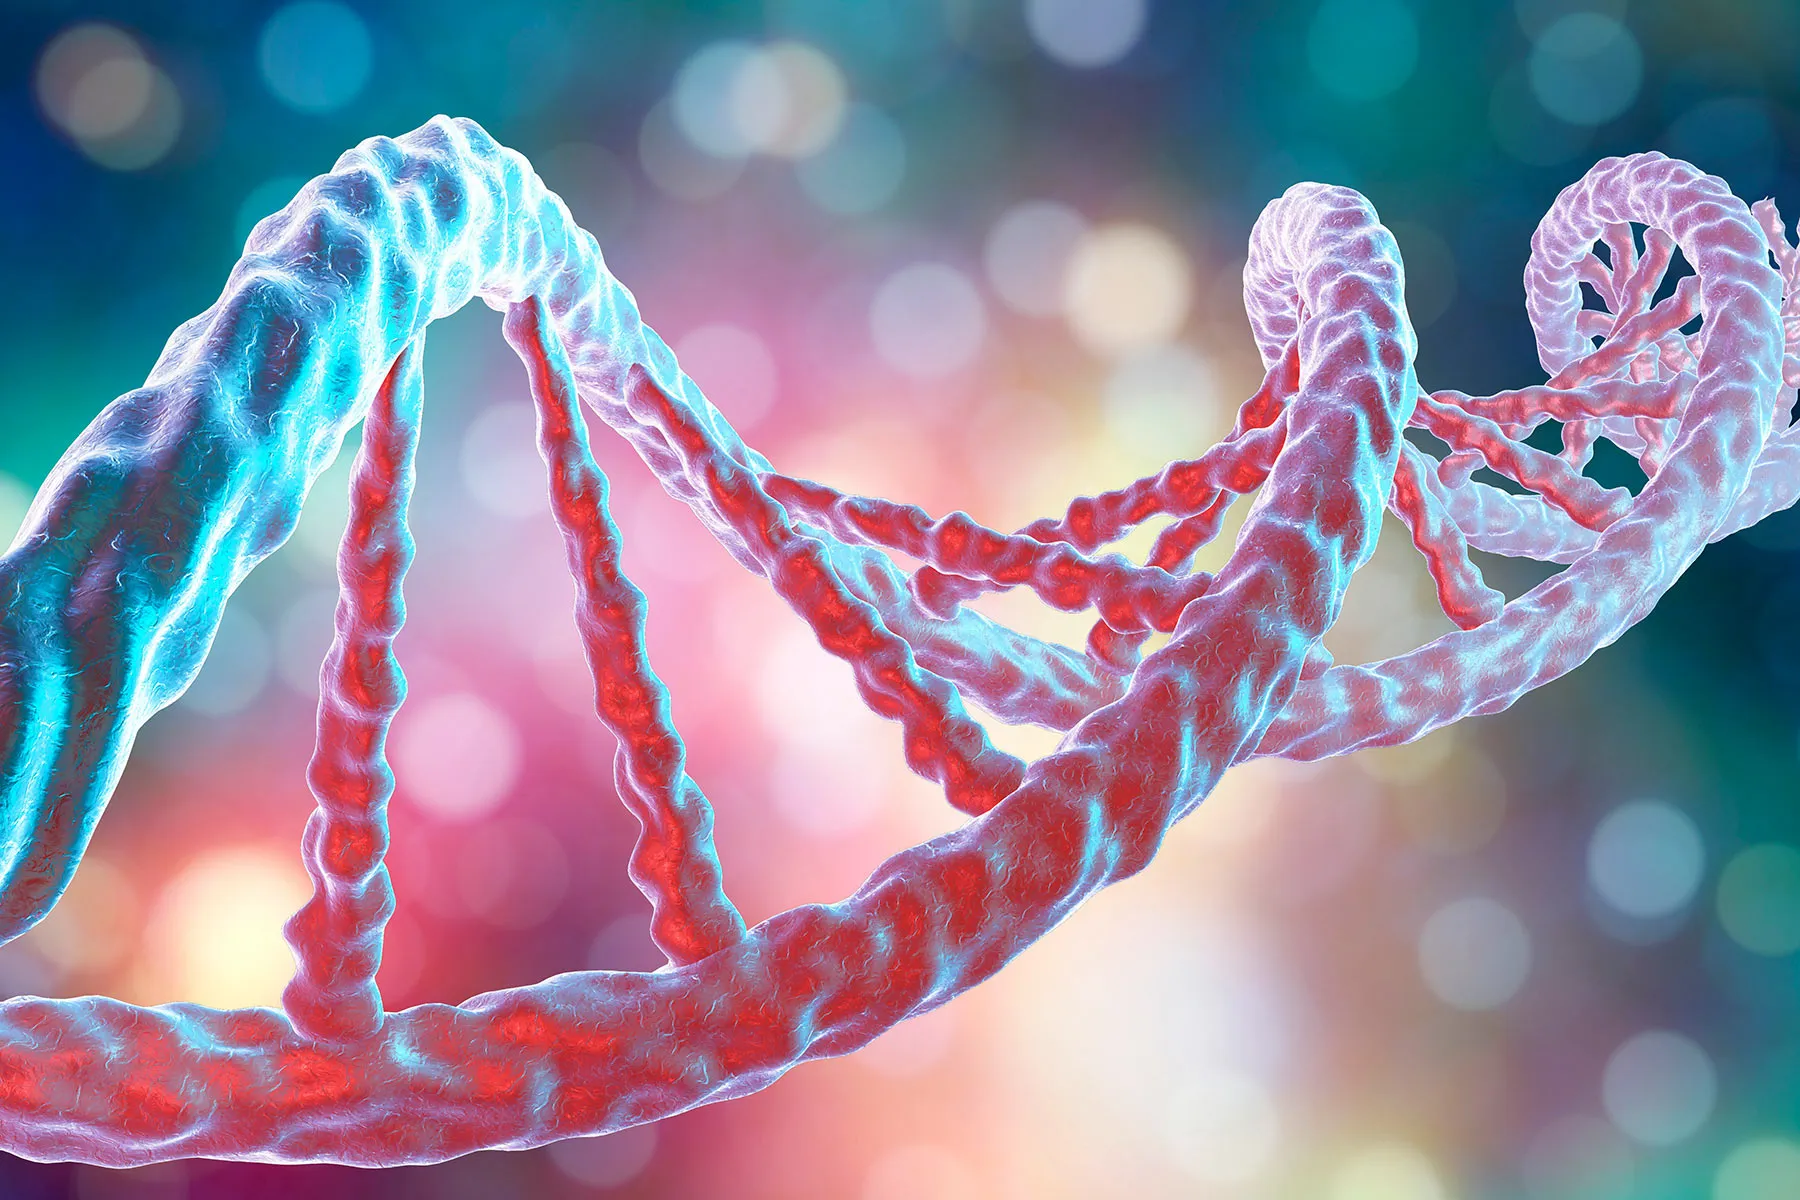 Genes vs. Lifestyle: Which Matters More for Health?